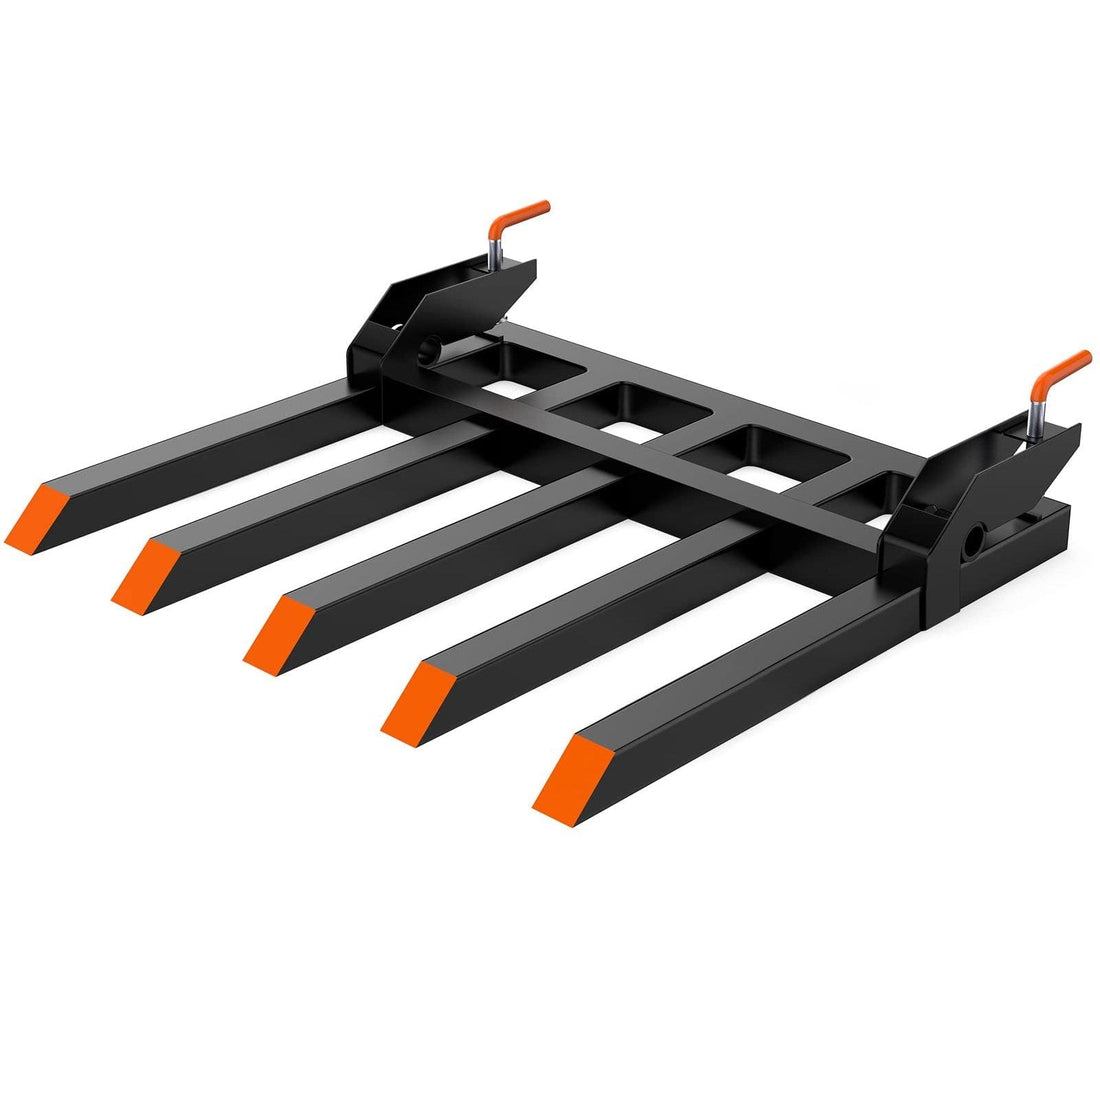 2500 LBS 42 Inch Clamp on Debris Forks Heavy Duty Clamp-on Pallet Forks for Tractor Black